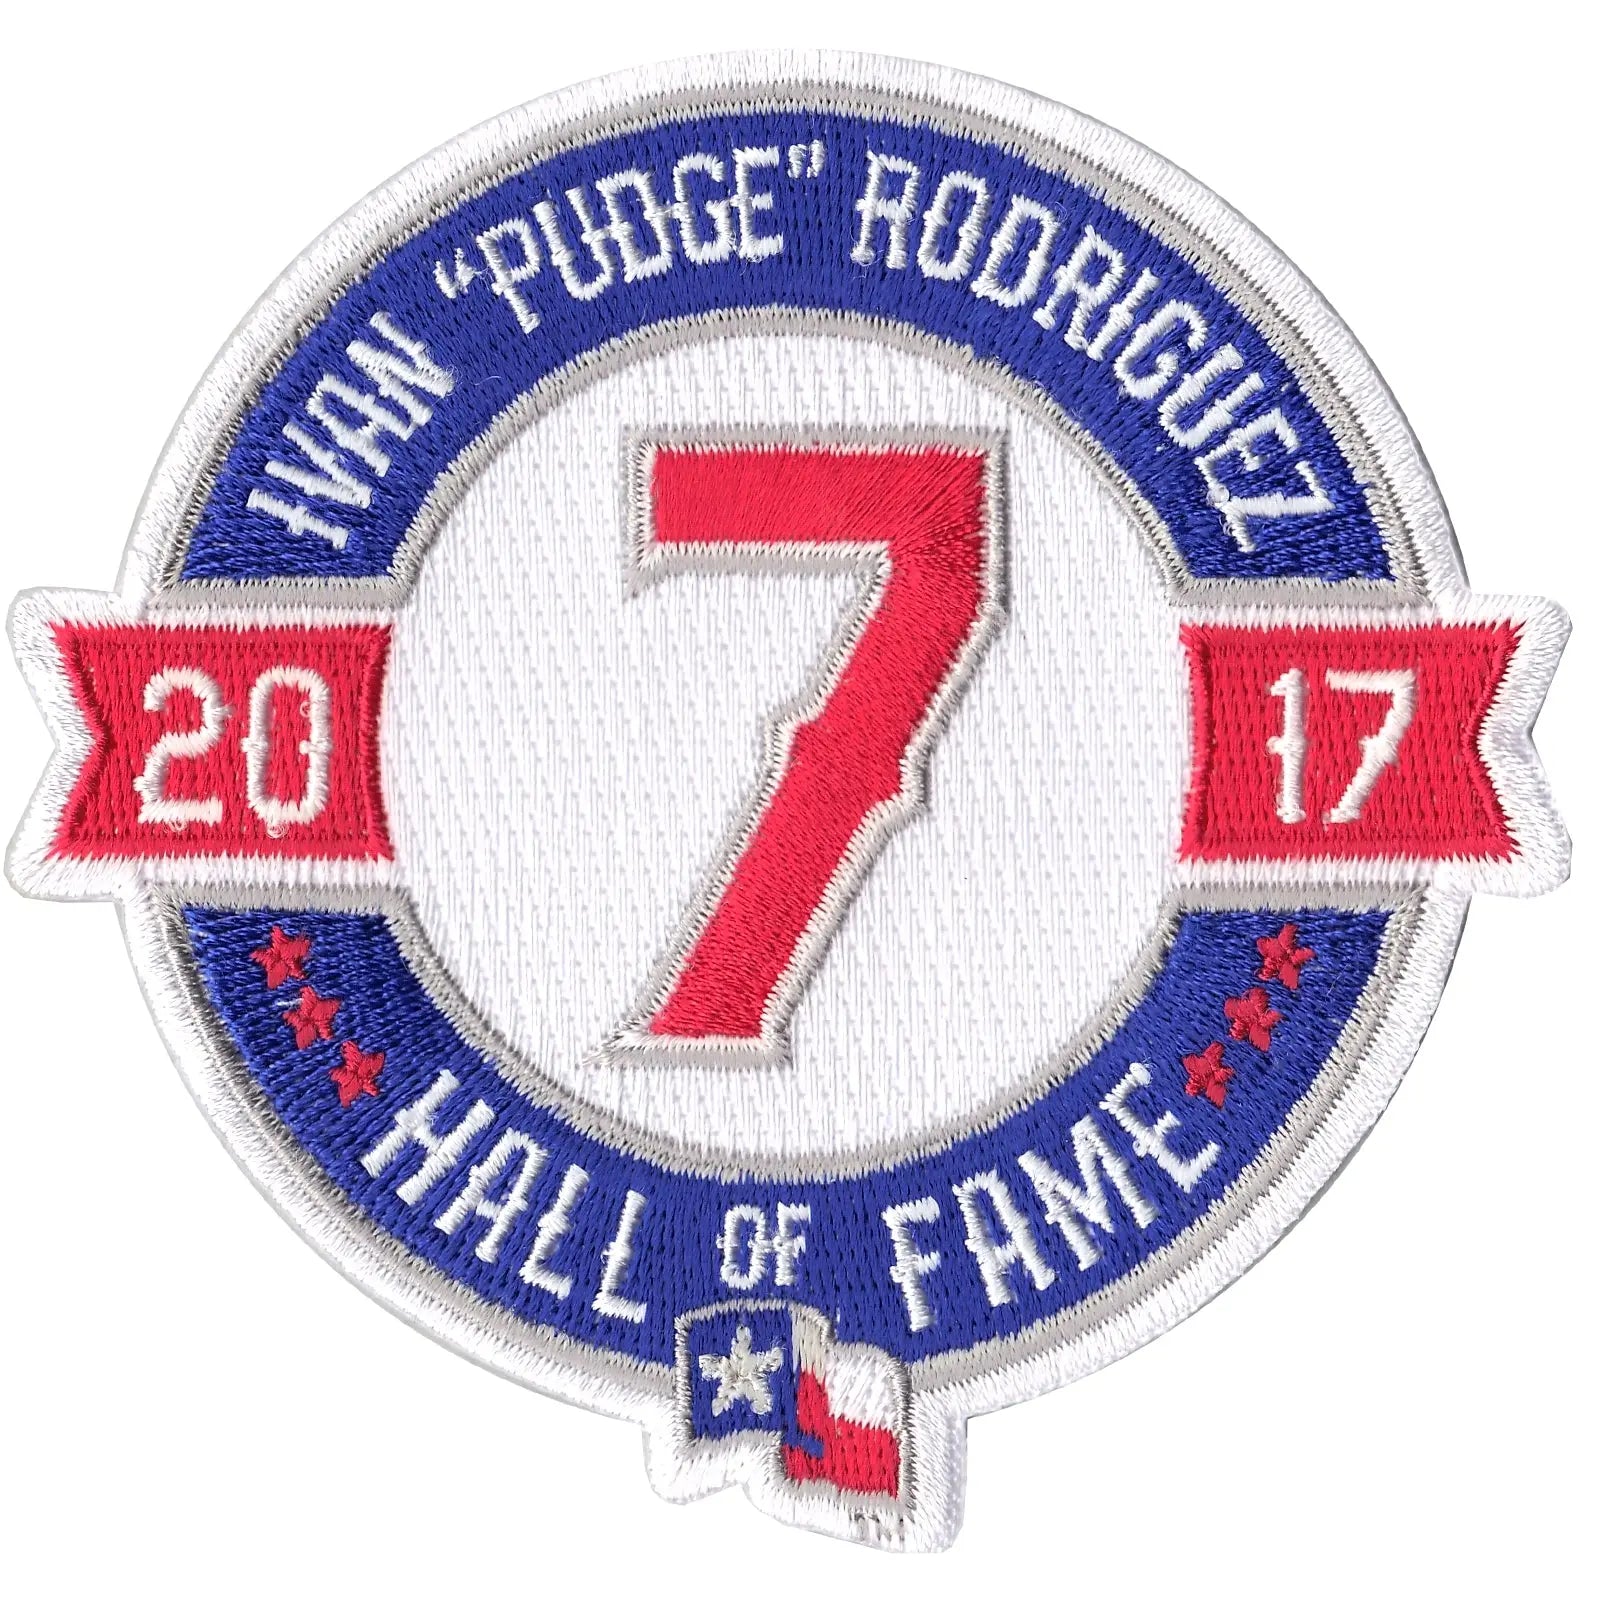 From the archives: New Hall of Famer Iván Pudge Rodríguez